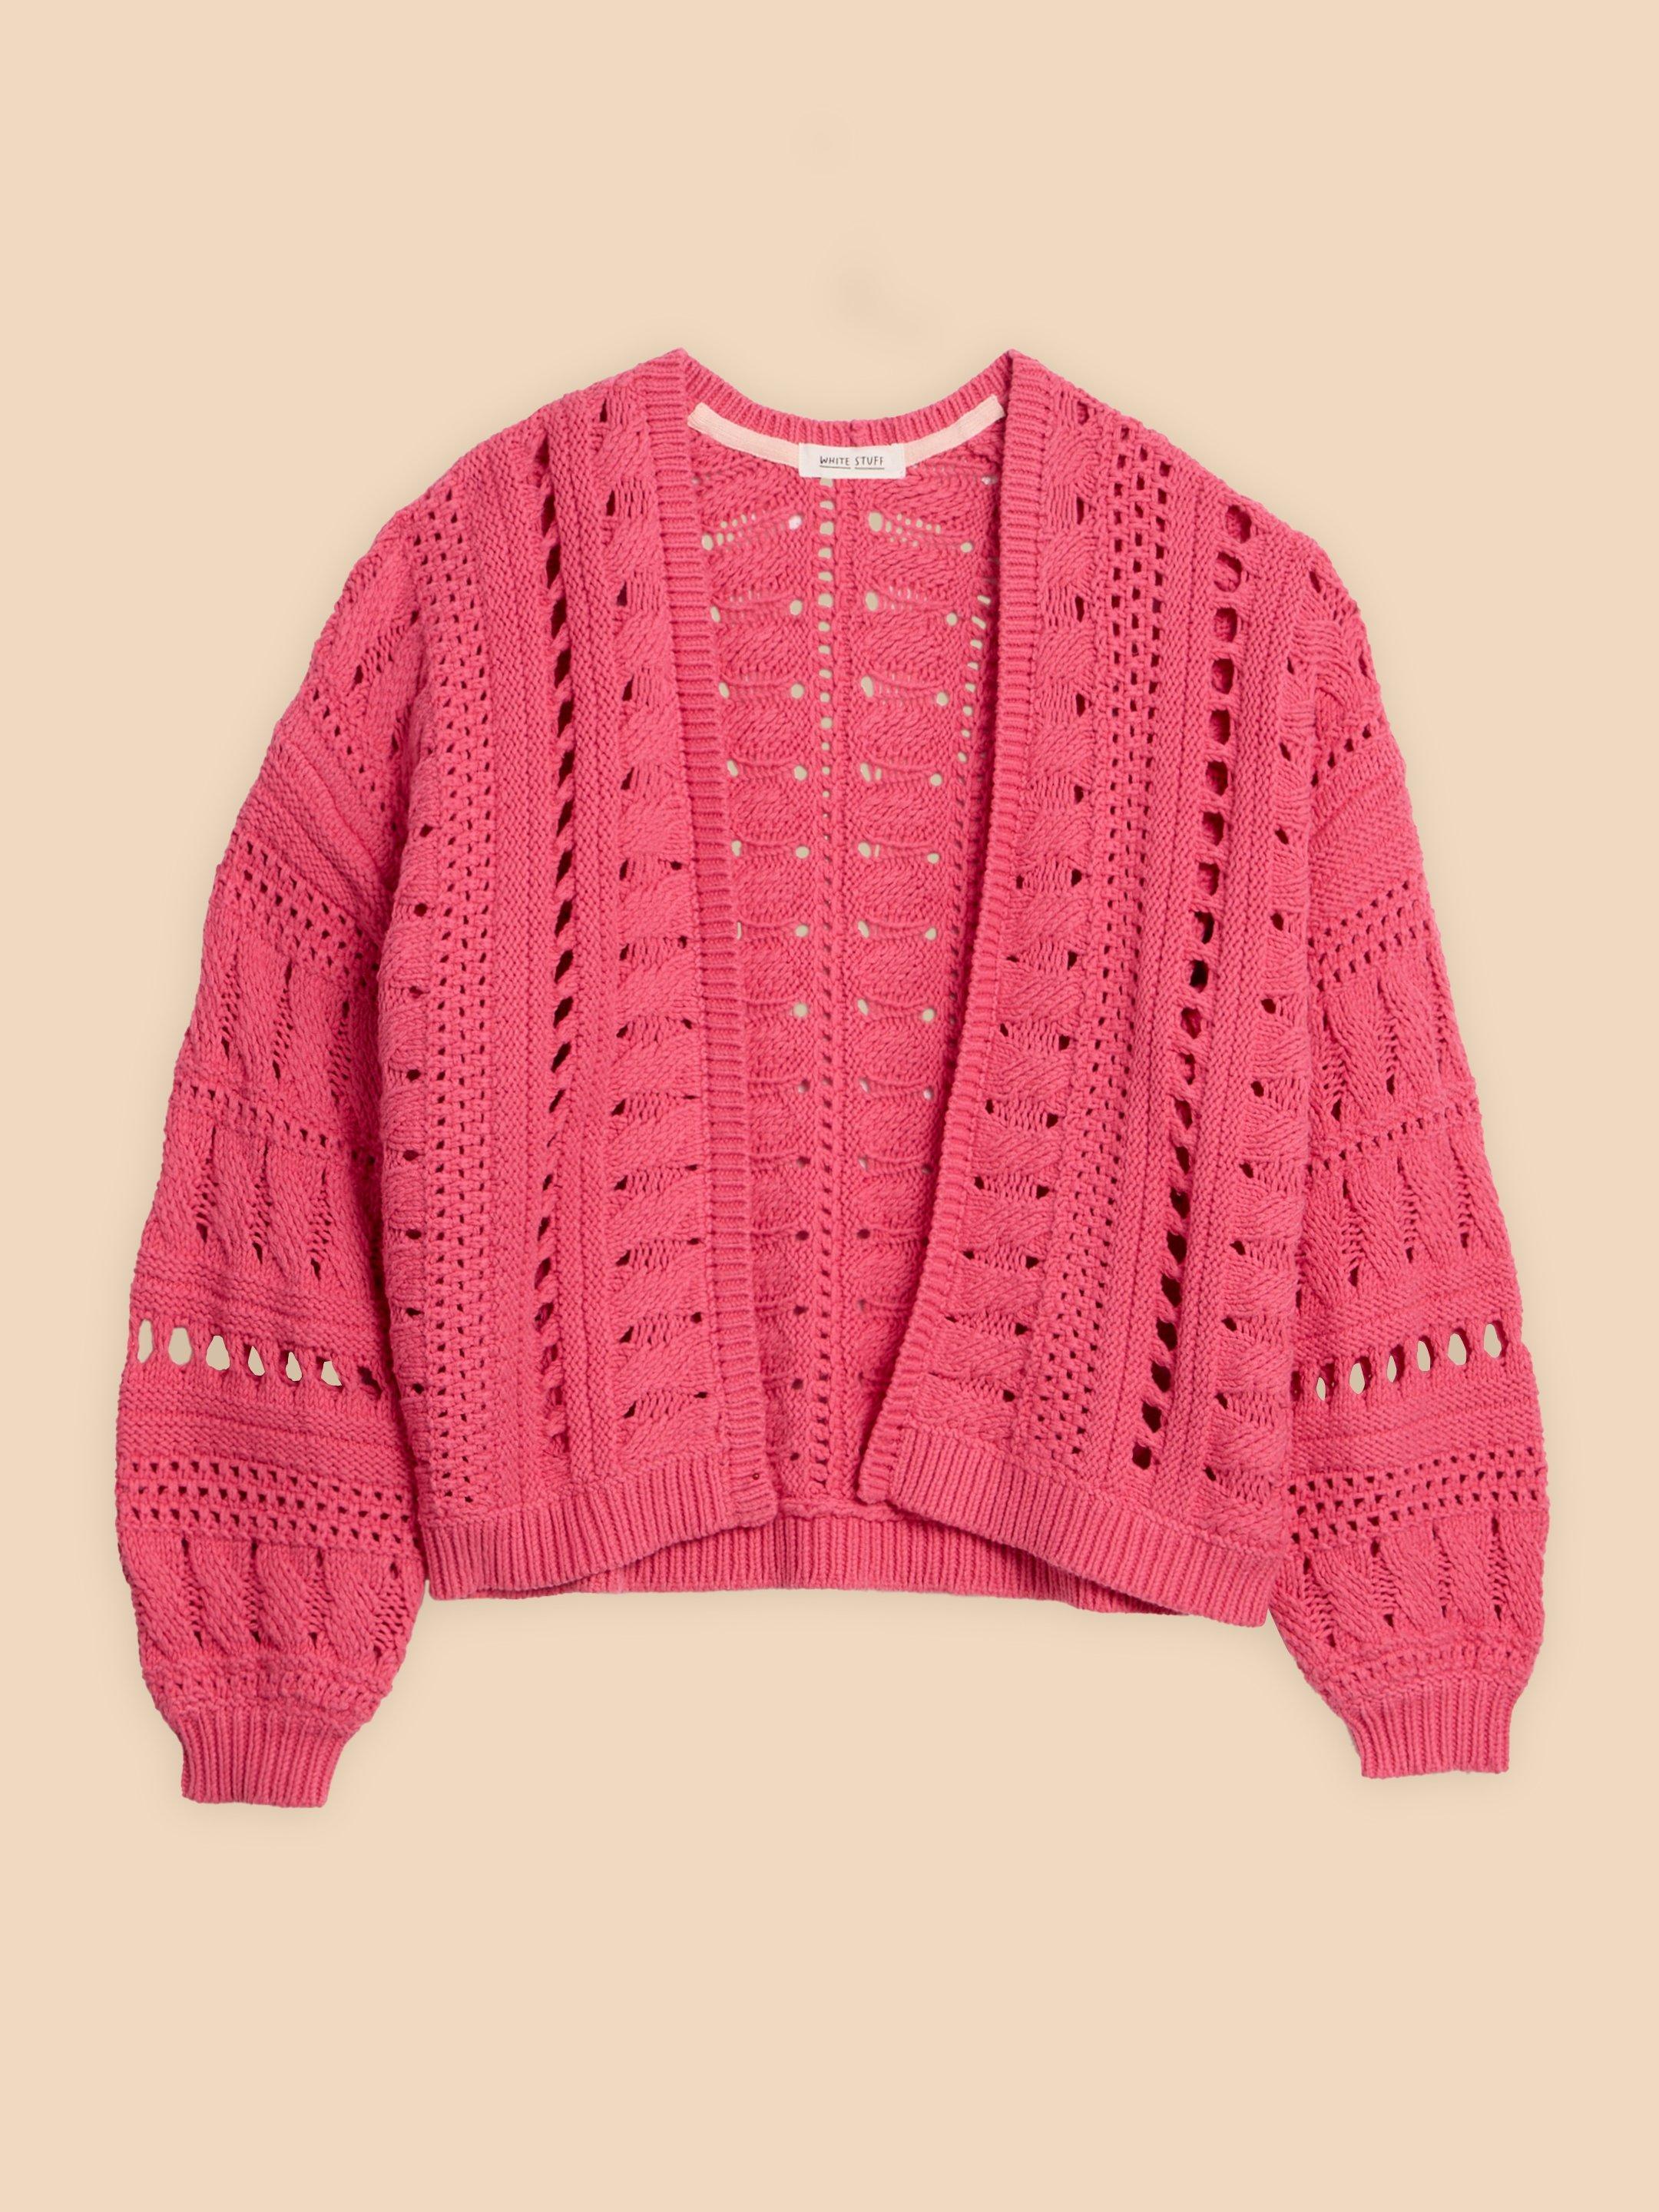 CASEY CARDI in BRT PINK - FLAT FRONT